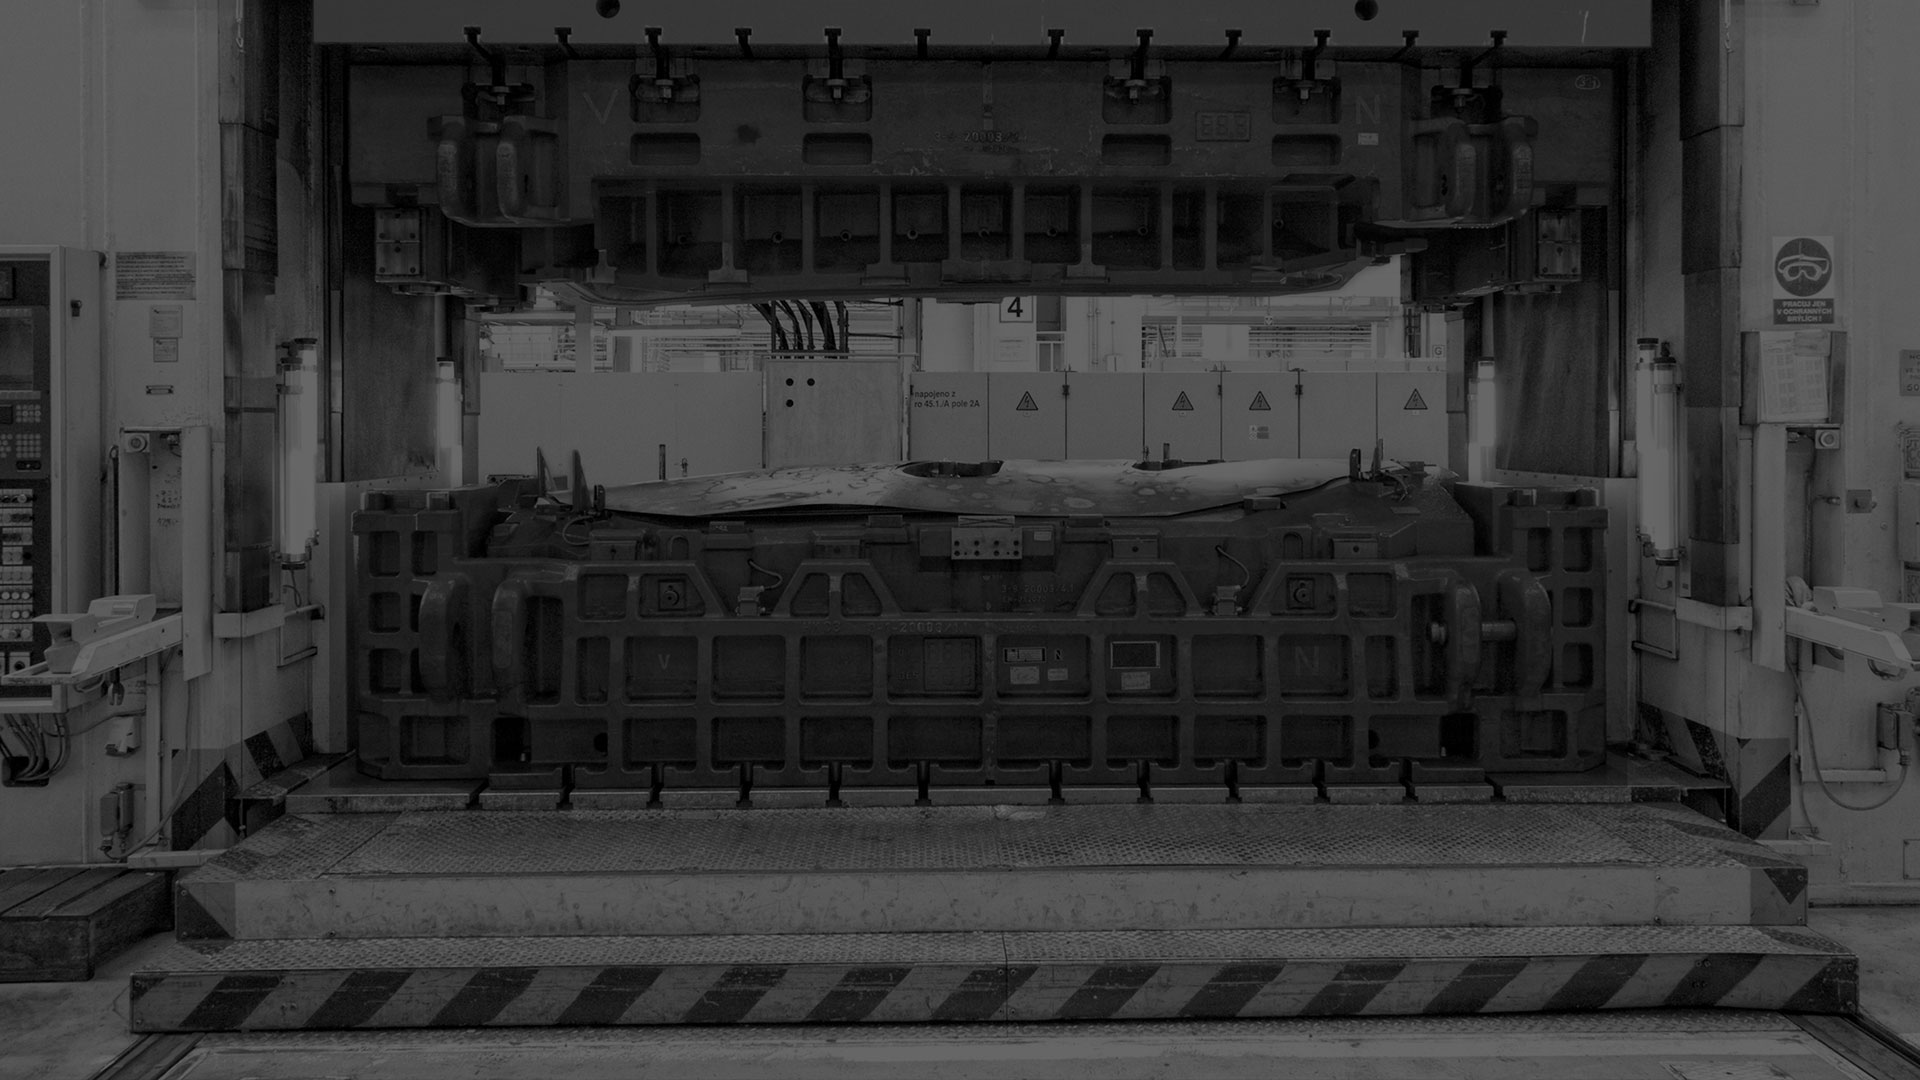 A darkened black and white image of a press system.